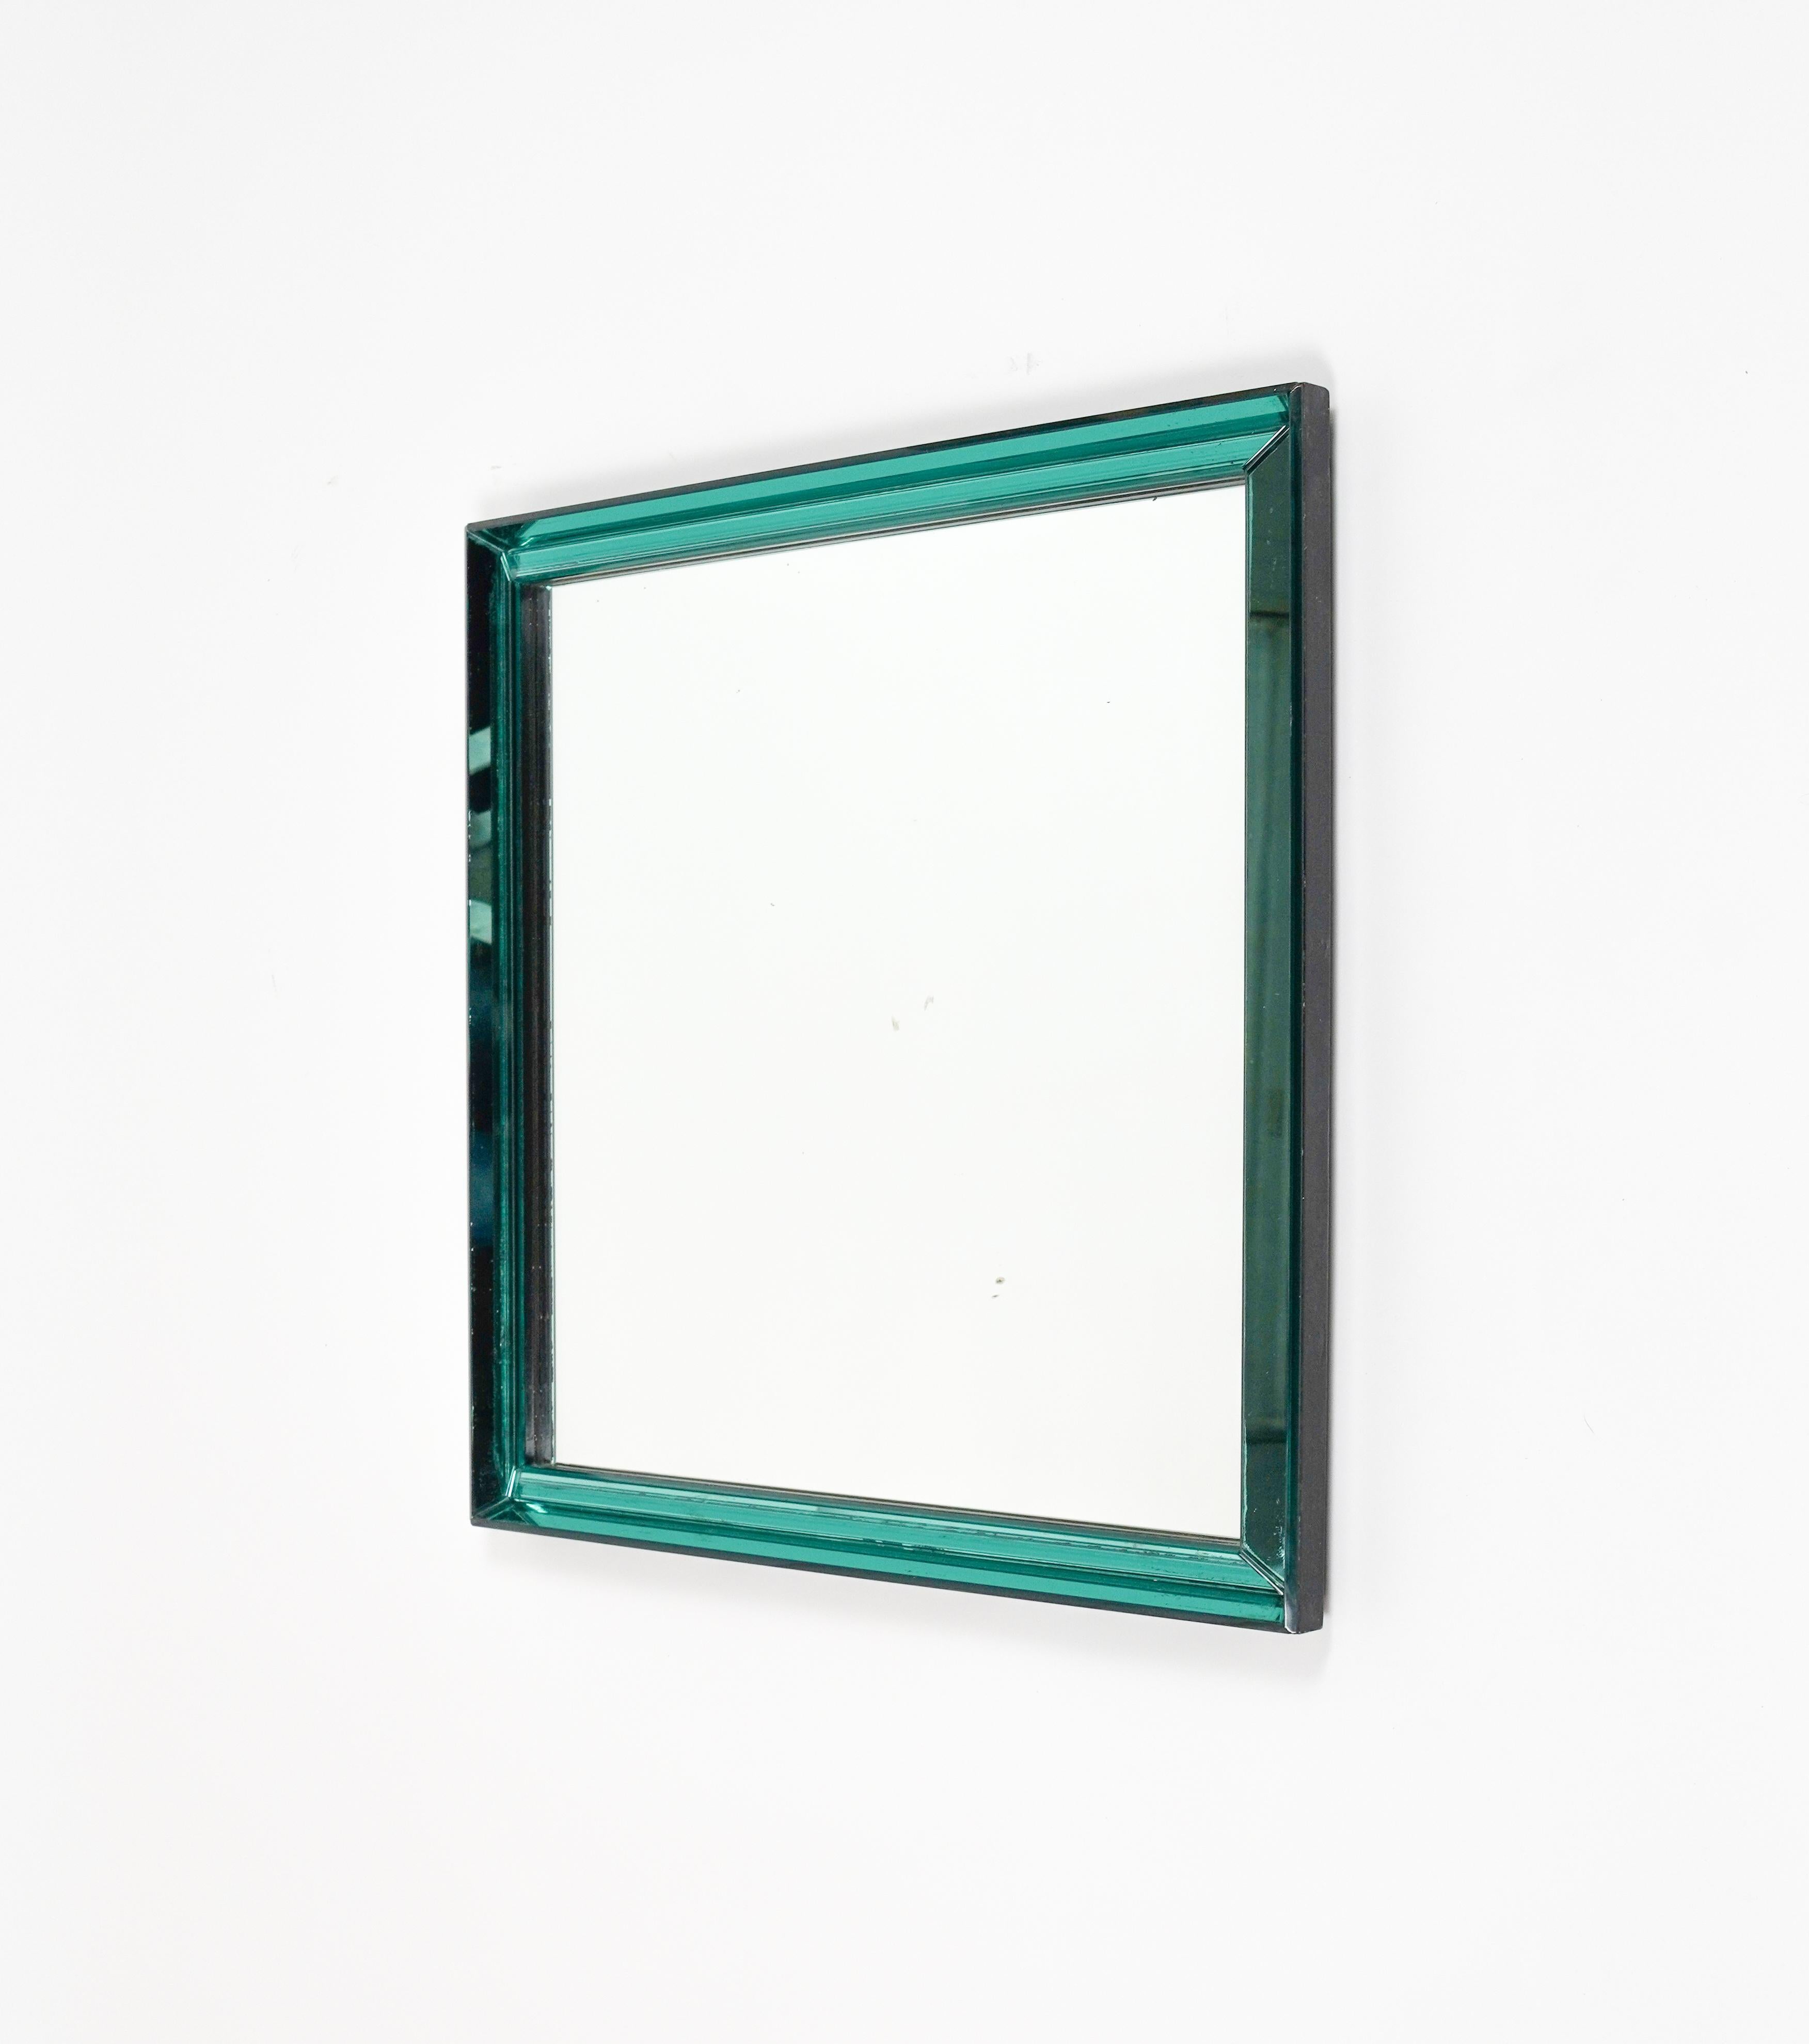 Metal Midcentury Squared Wall Mirror by Max Ingrand for Fontana Arte, Italy 1960s For Sale